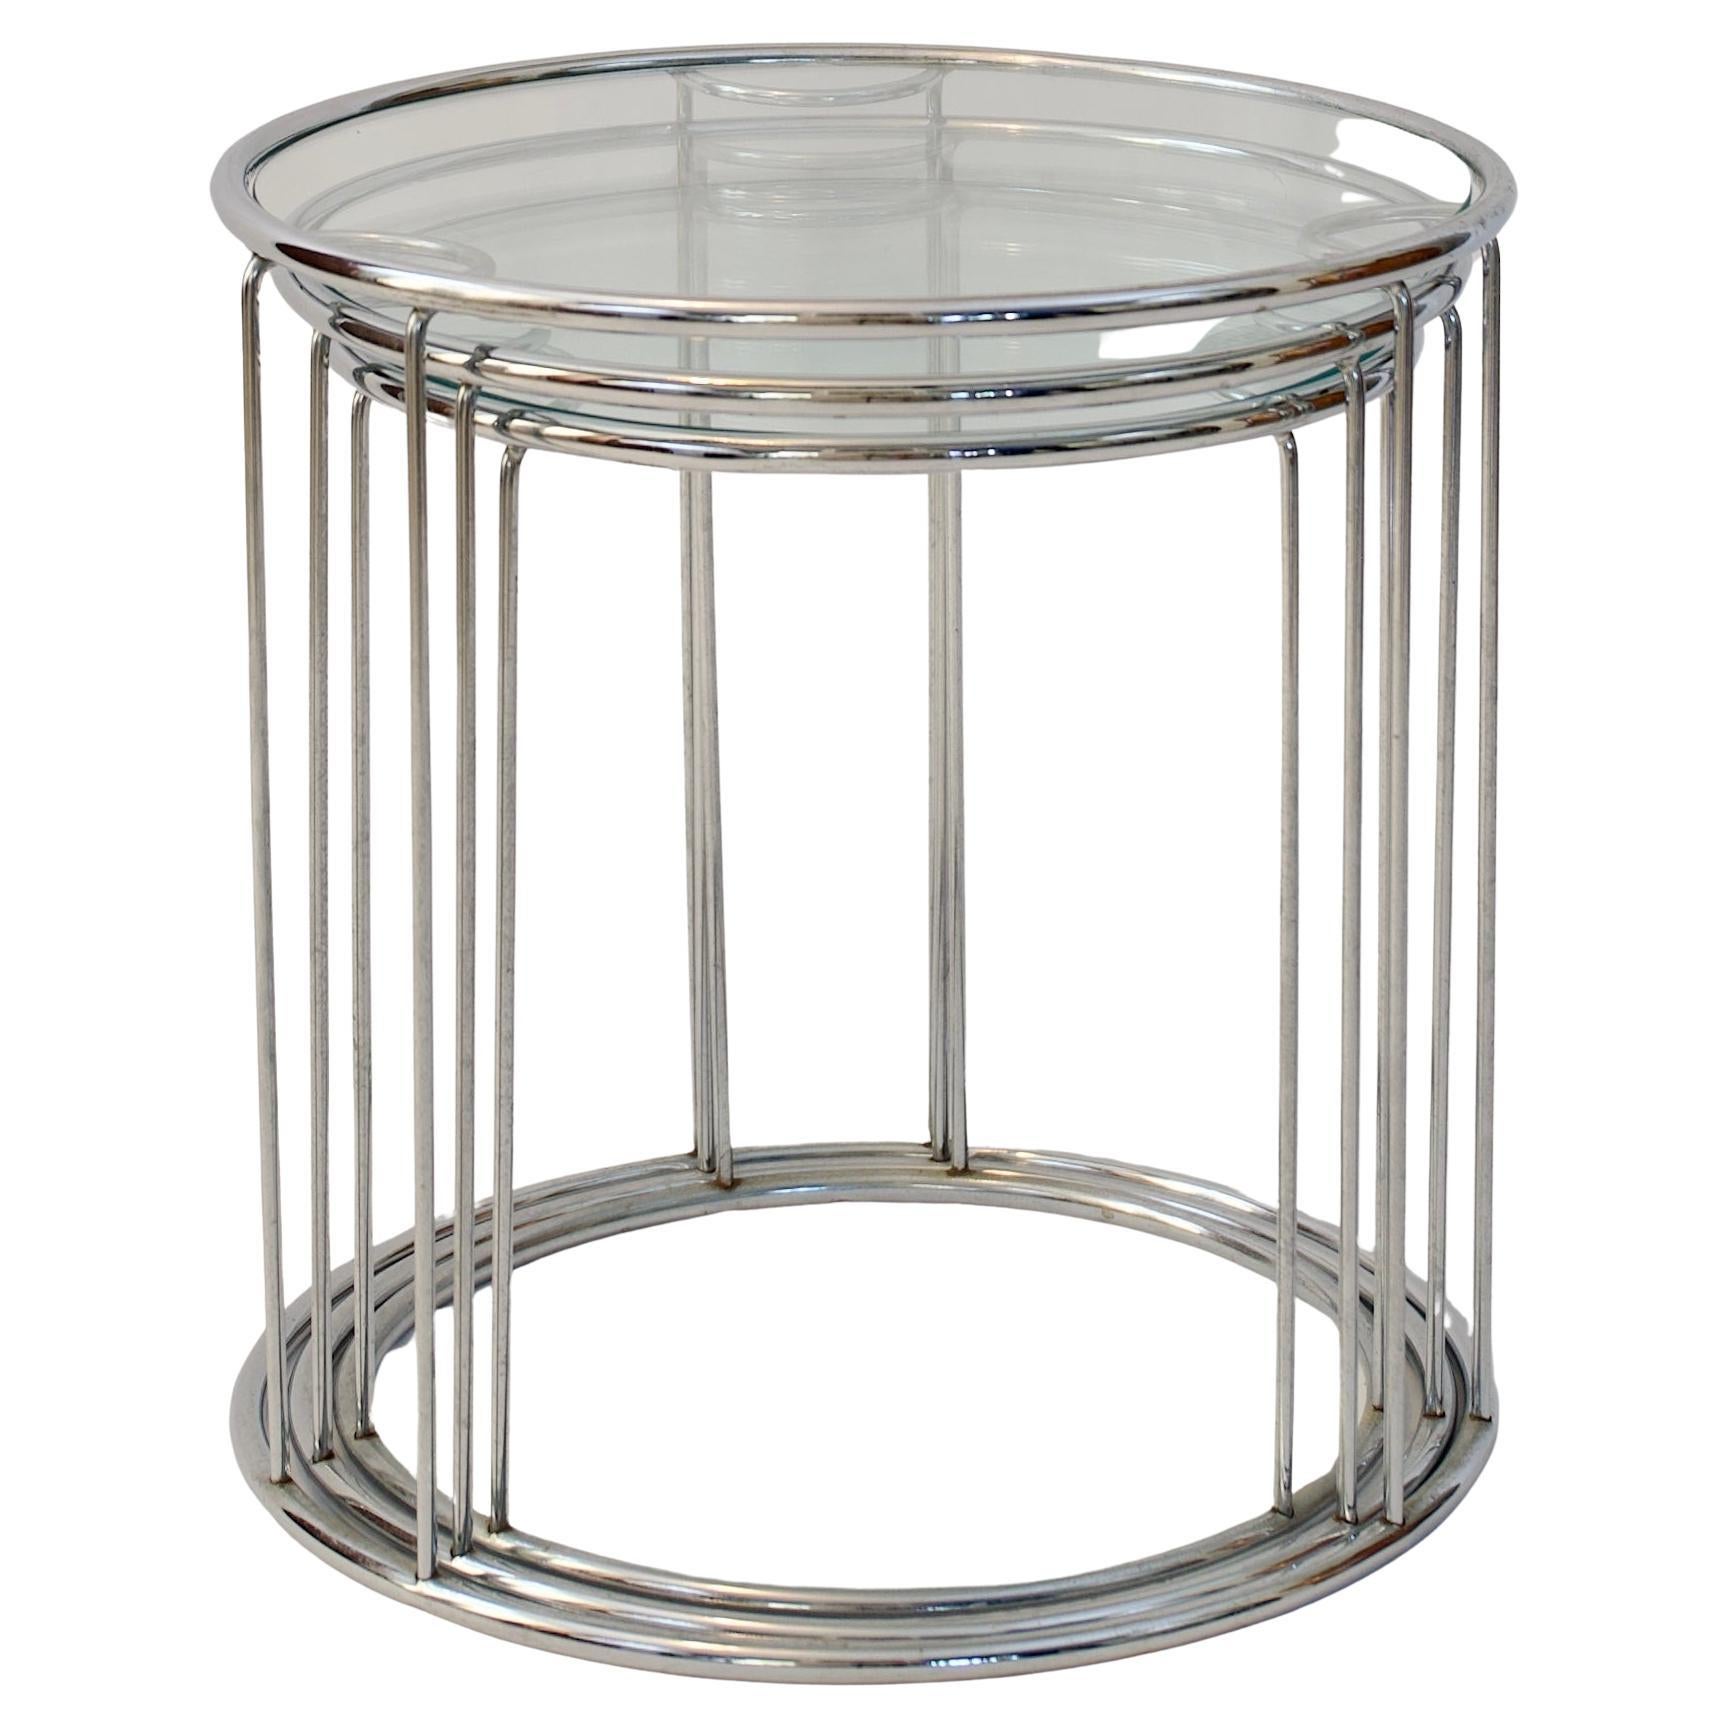 Set of Three Round Chrome and Glass Nesting End Tables Milo Baughman Style For Sale